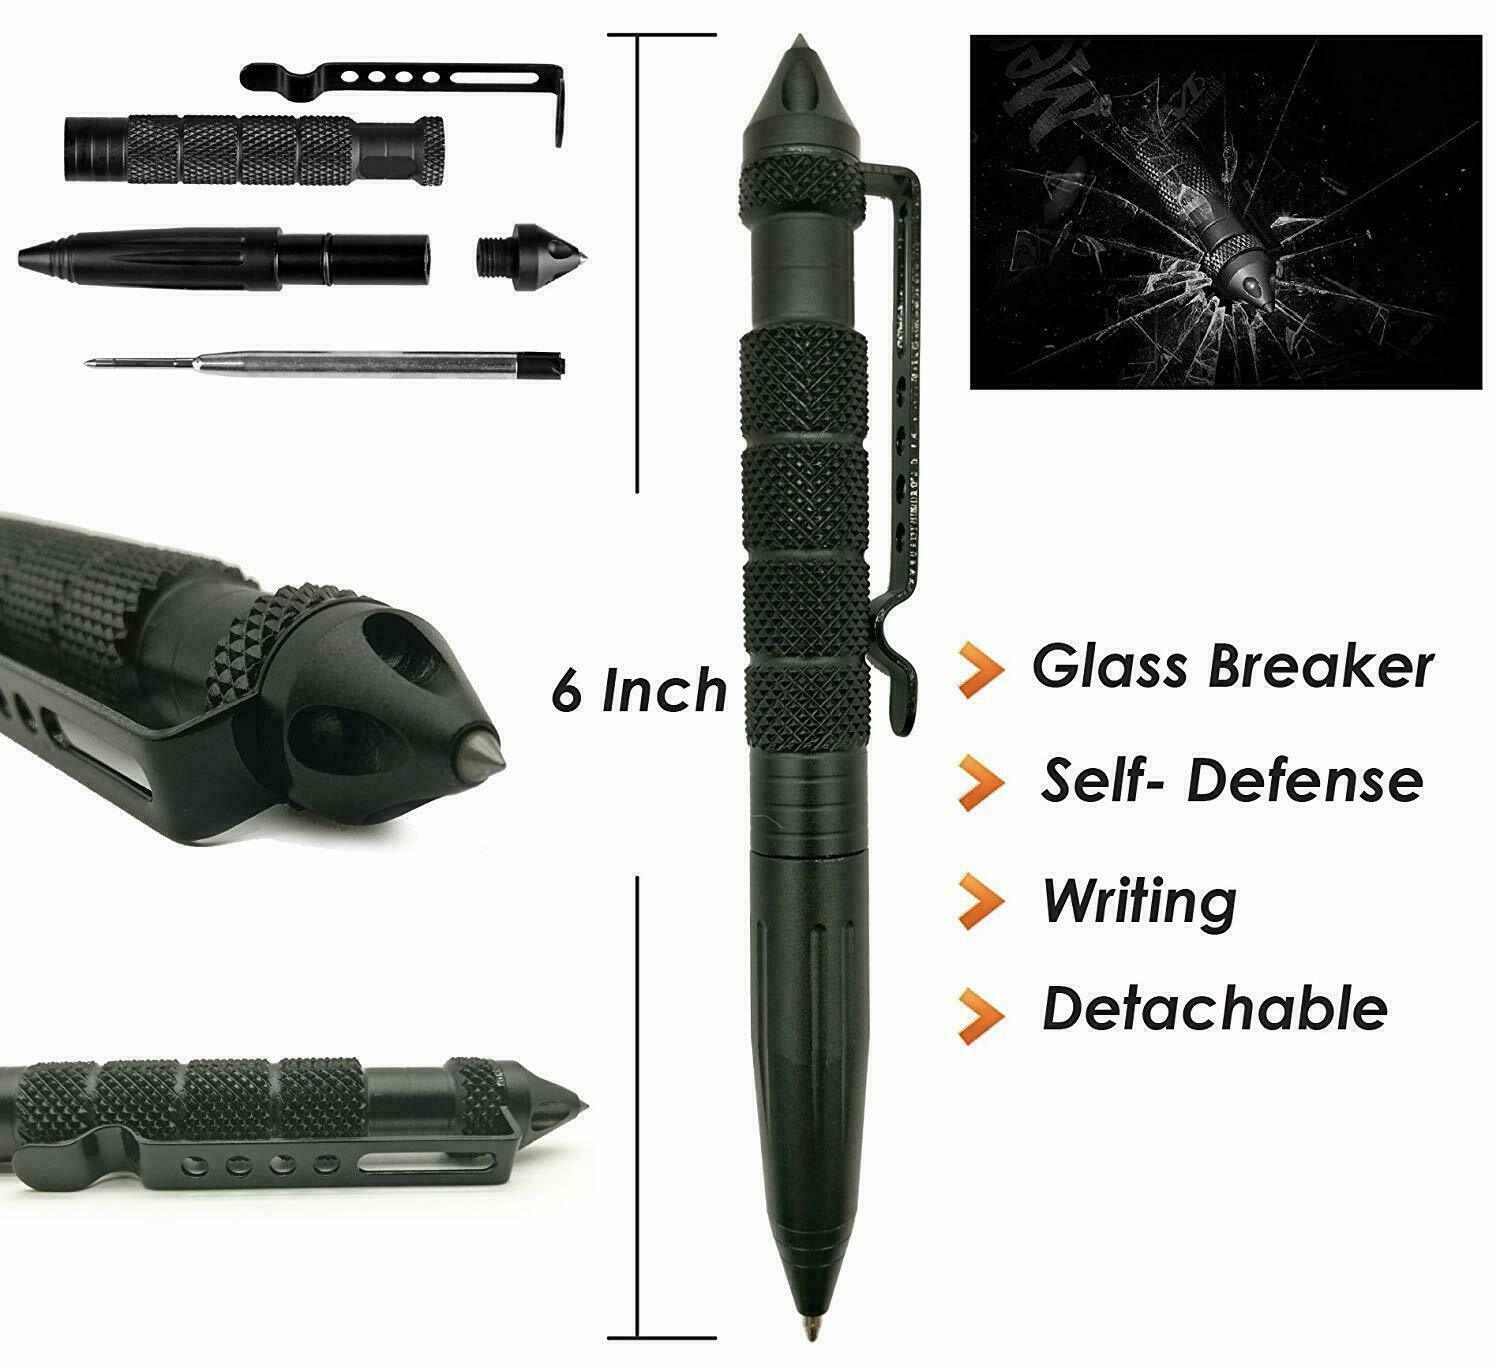 Tact Pen and its features and measurement. Text says 6 in, Glass Breaker, Self Defense, Writing, Detachable"